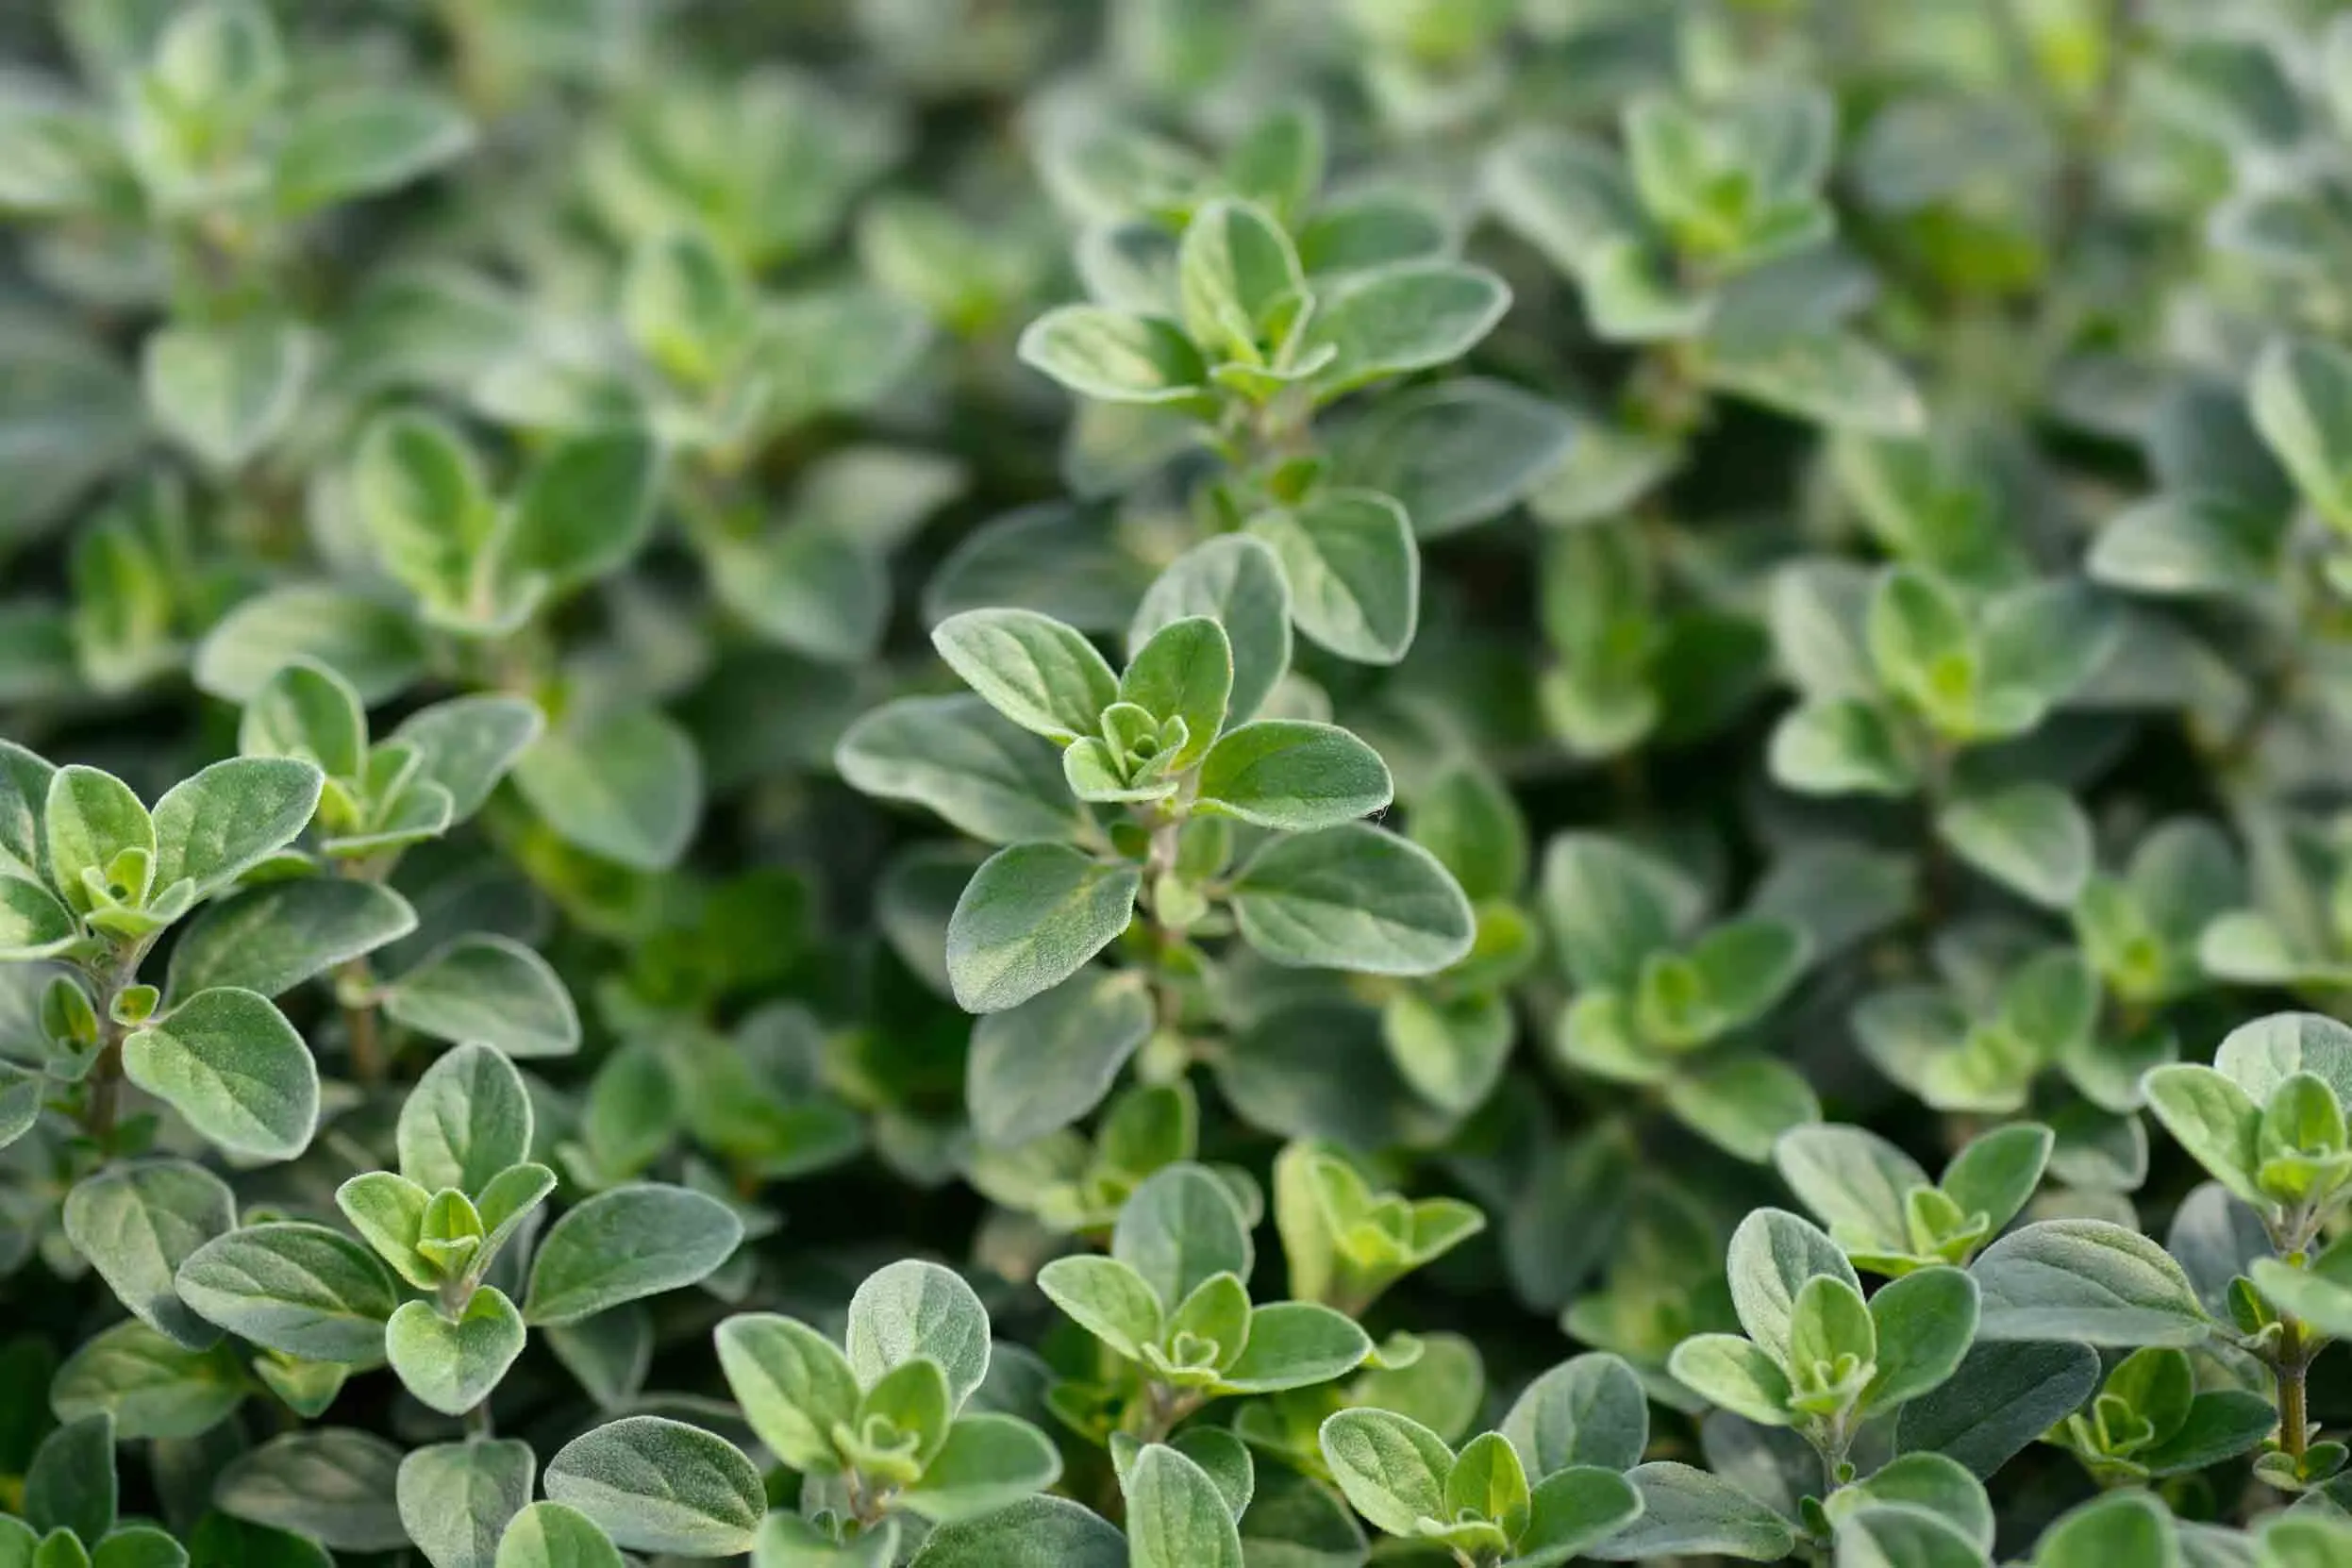 A close up of green Marjoram leaves.